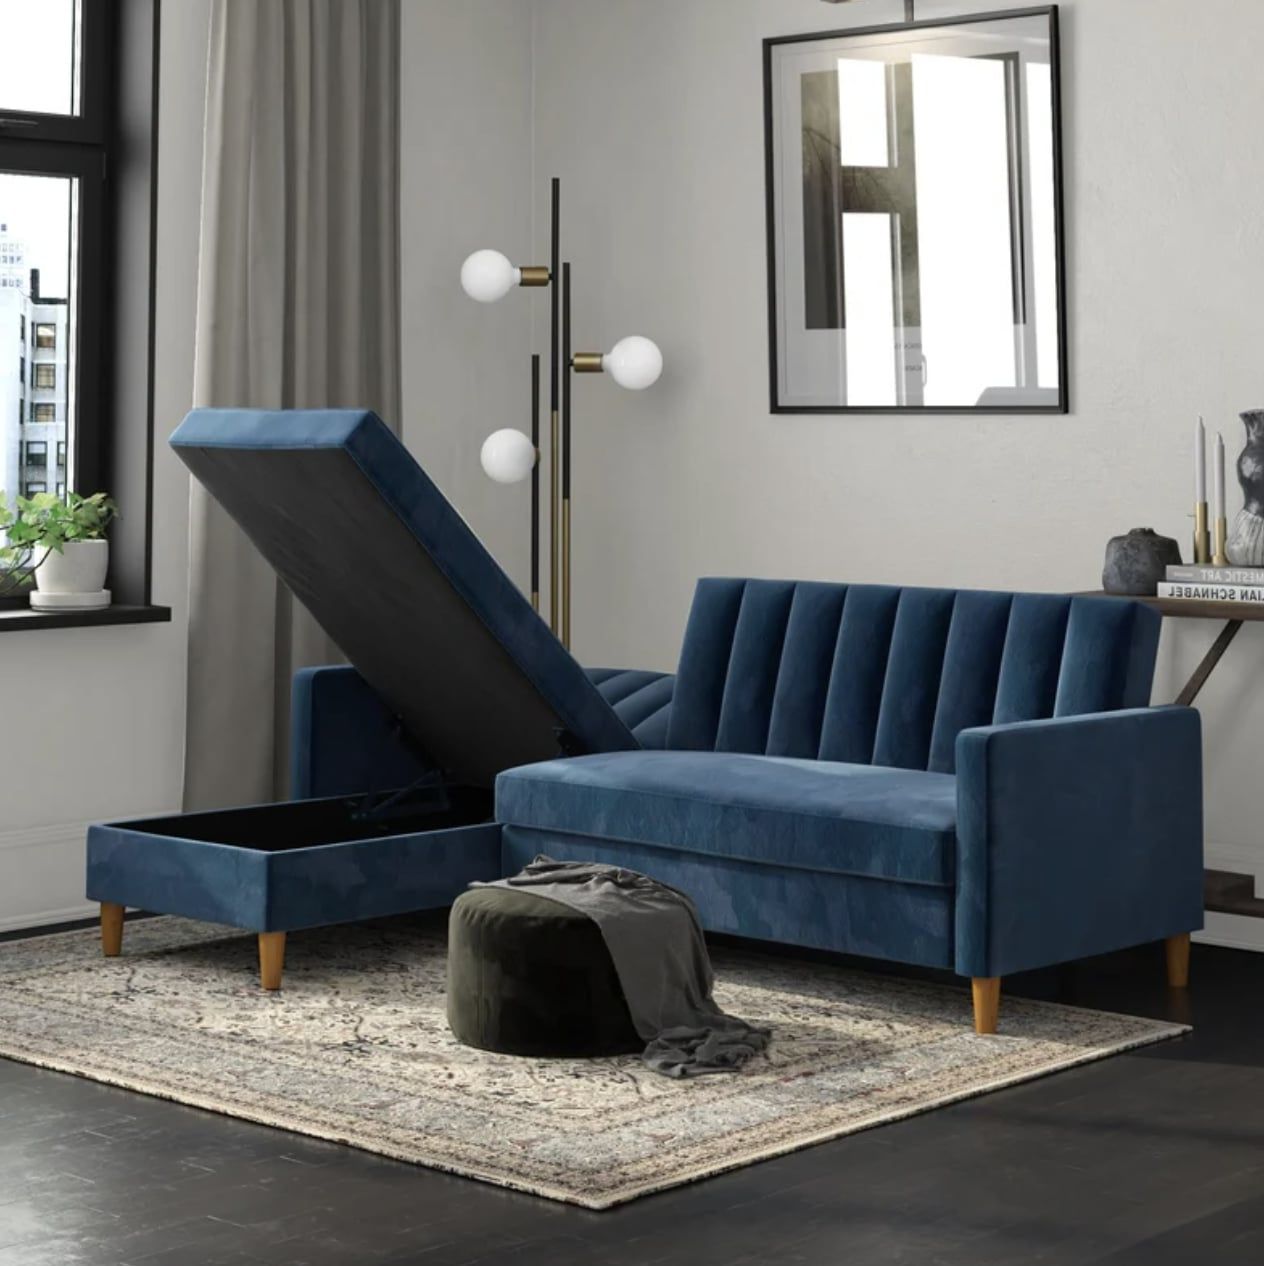 Best And Most Comfortable Sofas With Storage 2022 | Popsugar Home Throughout Convertible Sofas With Matching Chaise (View 7 of 20)